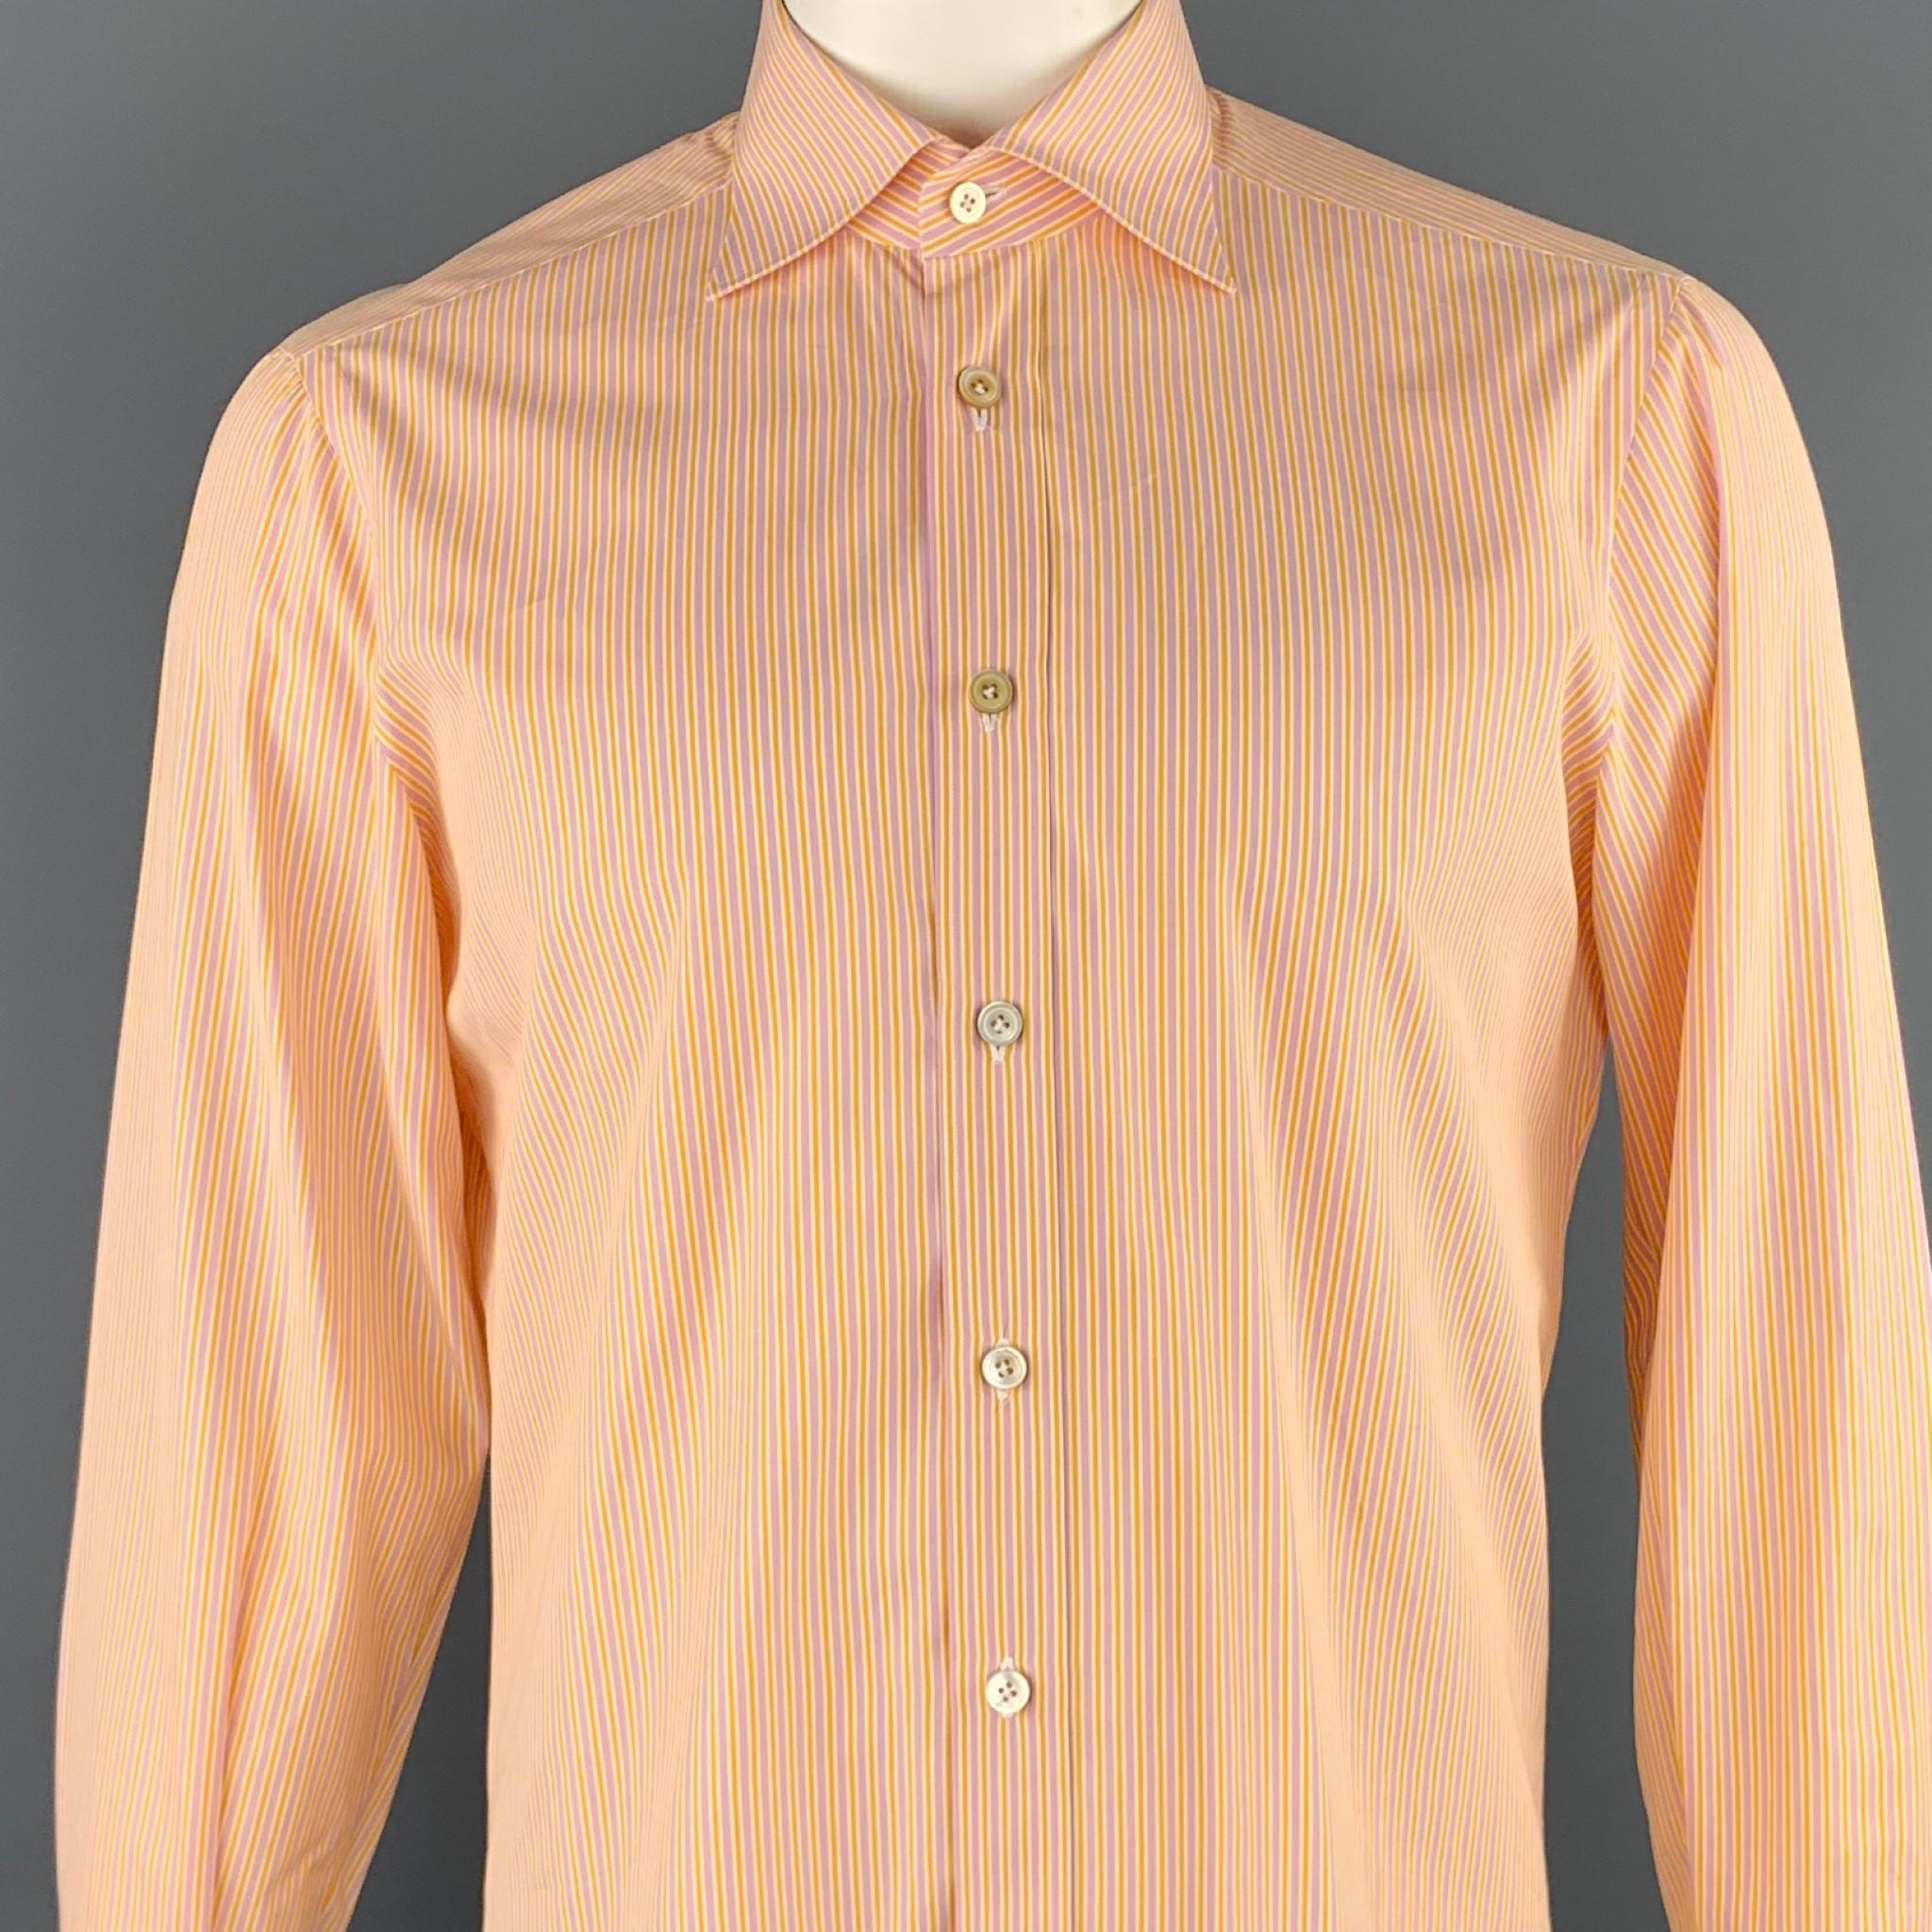 KITON long sleeve shirt comes in a yellow & purple stripe cotton featuring a button up style and a spread collar. Made in Italy.

Excellent Pre-Owned Condition.
Marked: 40/15.5

Measurements:

Shoulder: 18 in. 
Chest: 42 in. 
Sleeve: 25 in. 
Length: